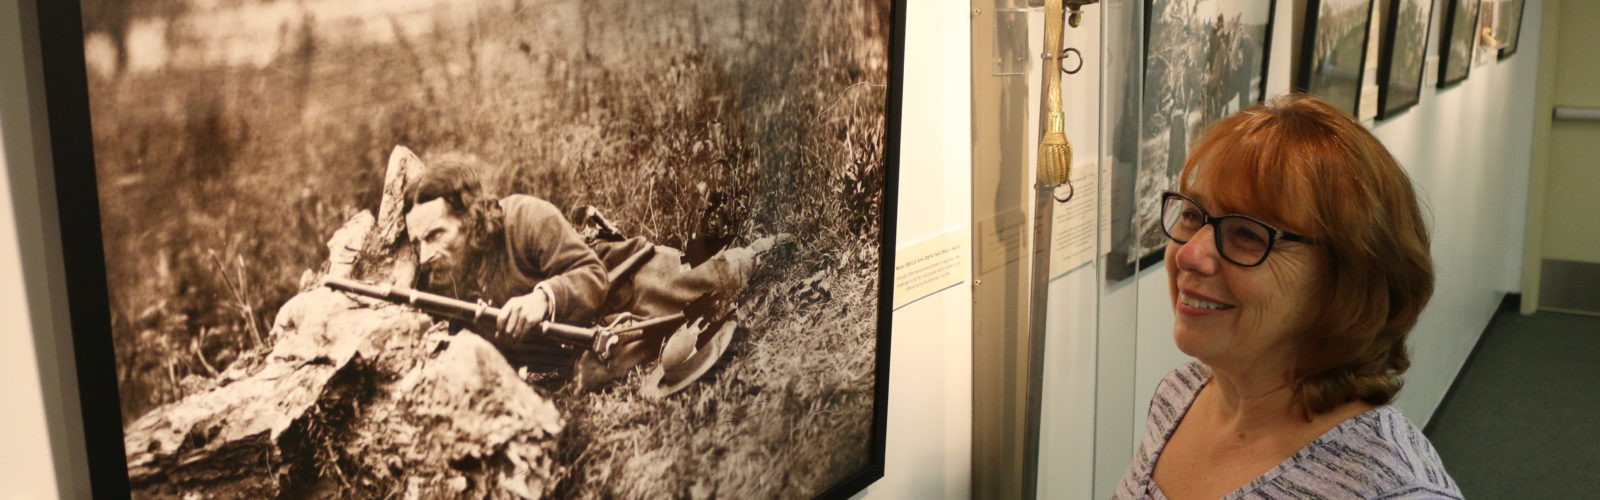 a smiling woman looks at a photo in a gallery of a soldier hiding behind a rock